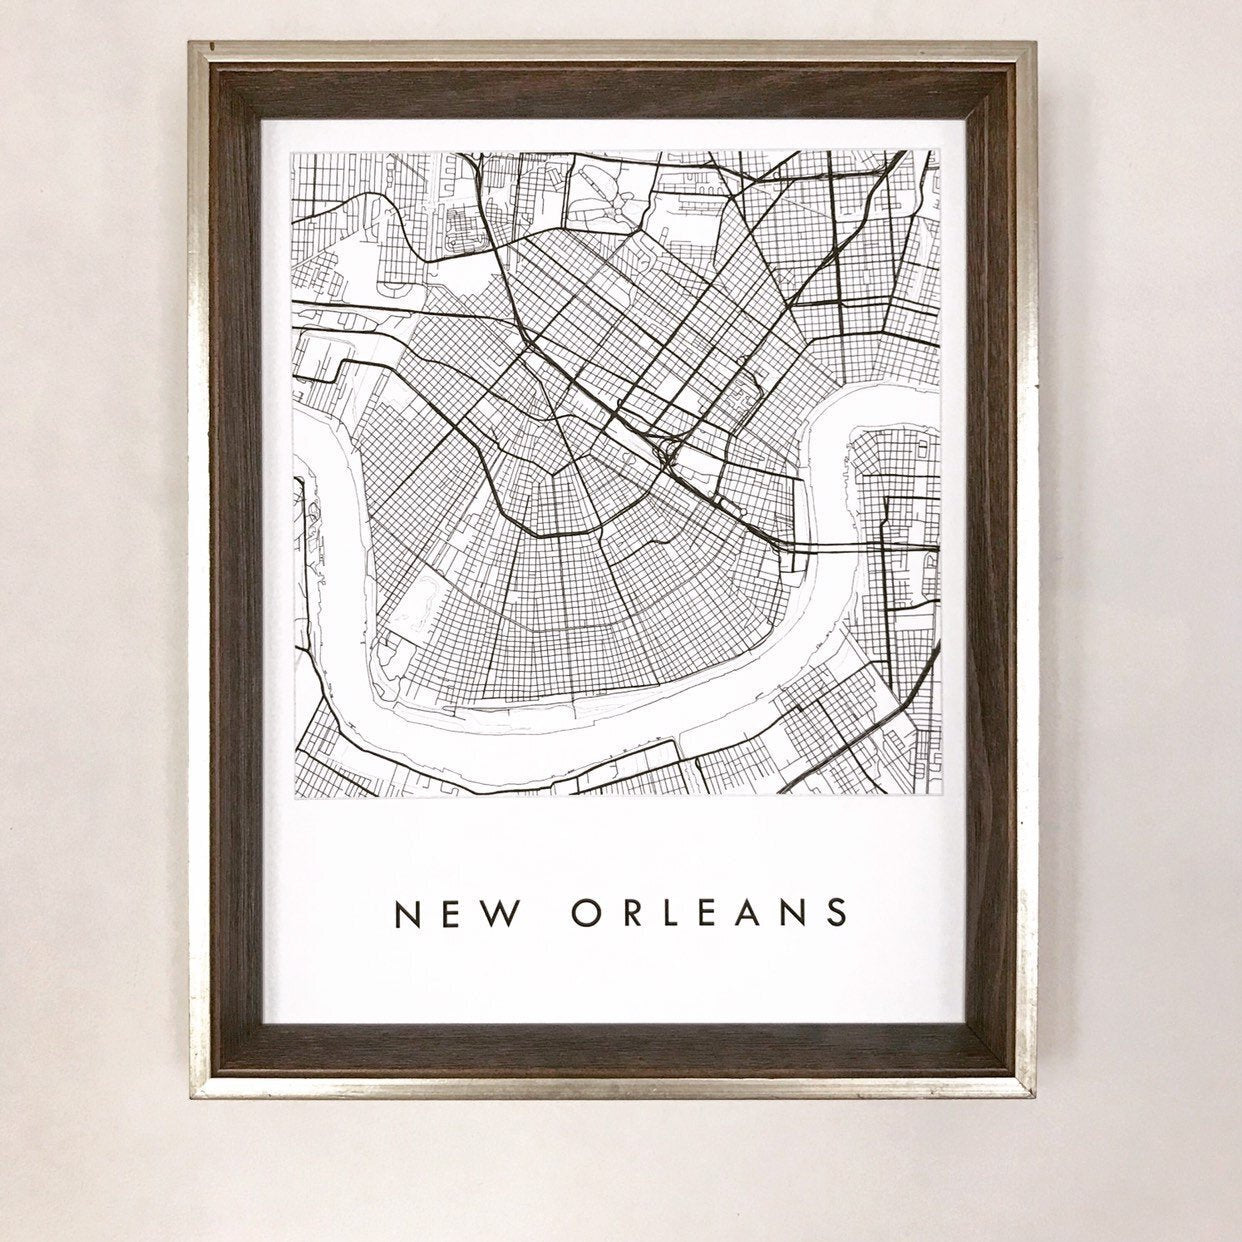 NEW ORLEANS City Lines Map: PRINT